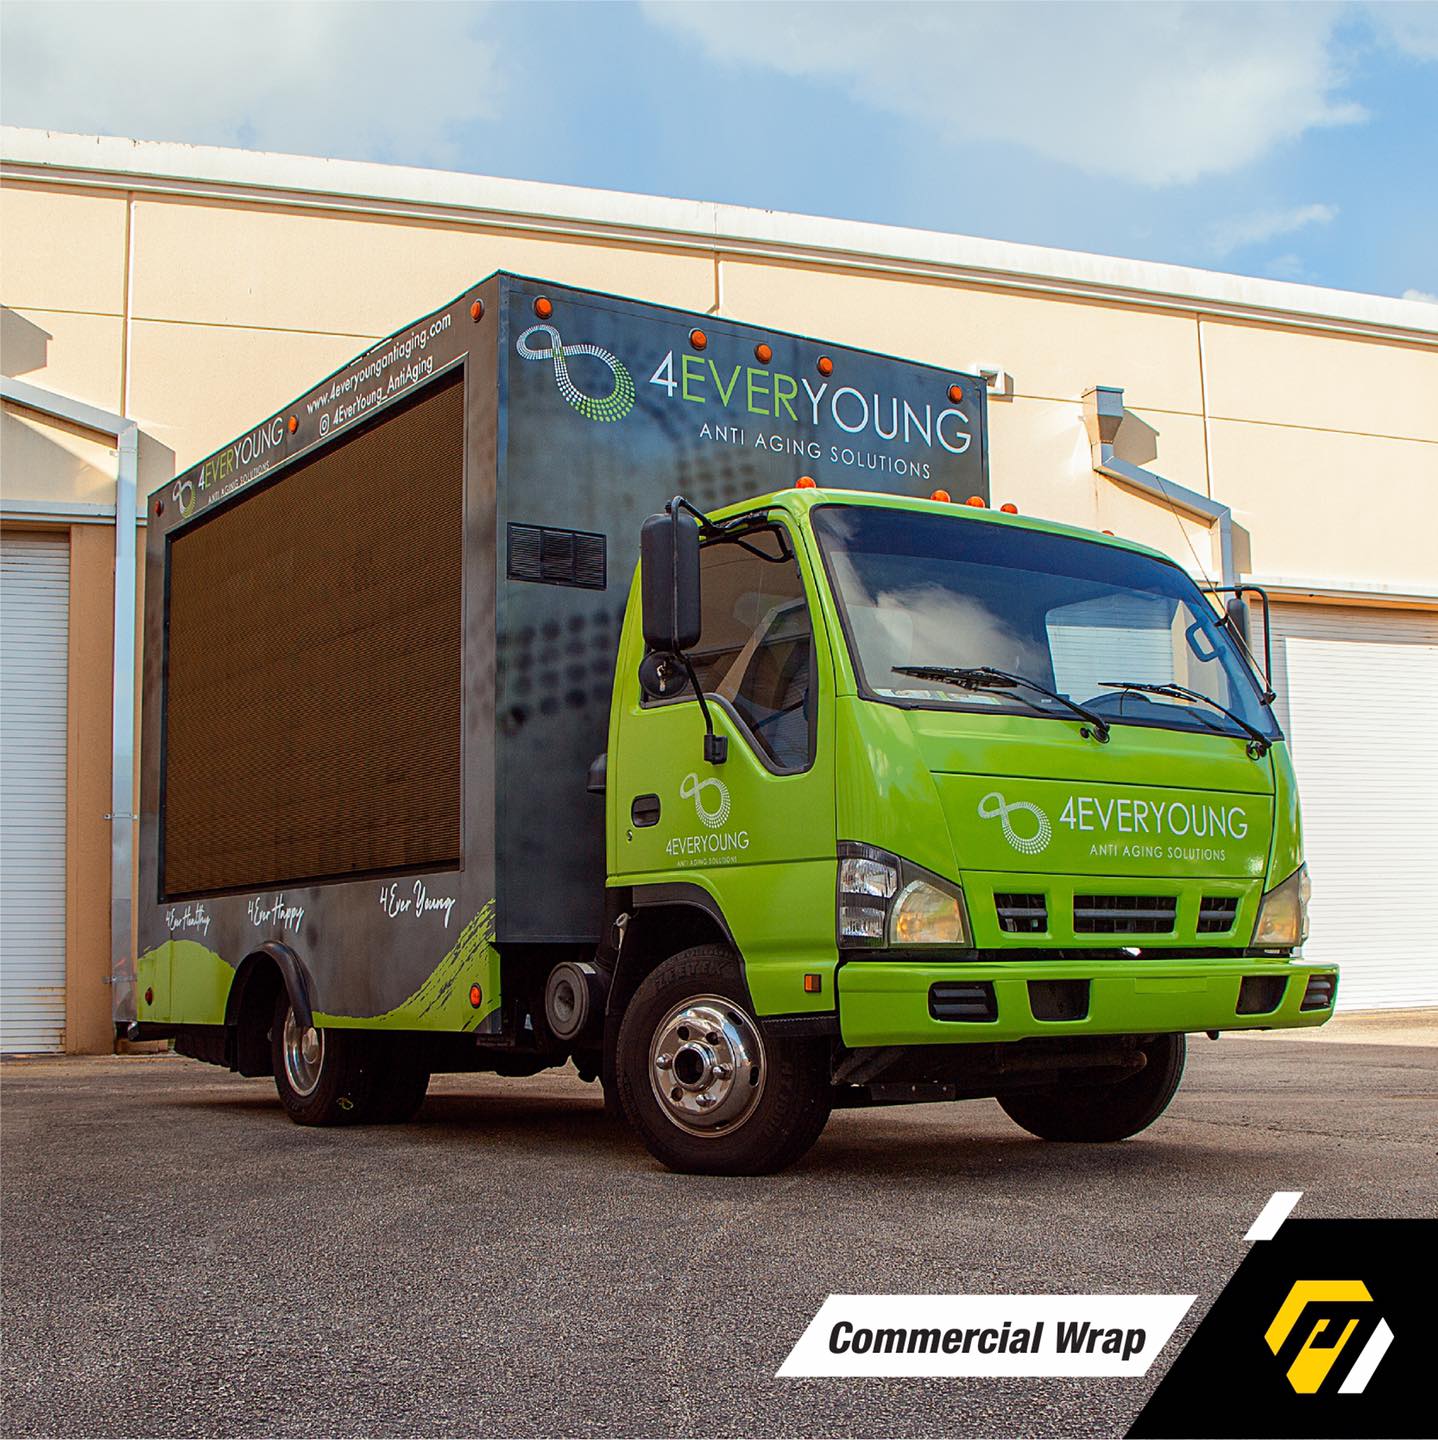 Printmor-Portfolio-Image-4EVER-Young-Anti-Aging-Solution-Box-Truck-Commercial-Wrap